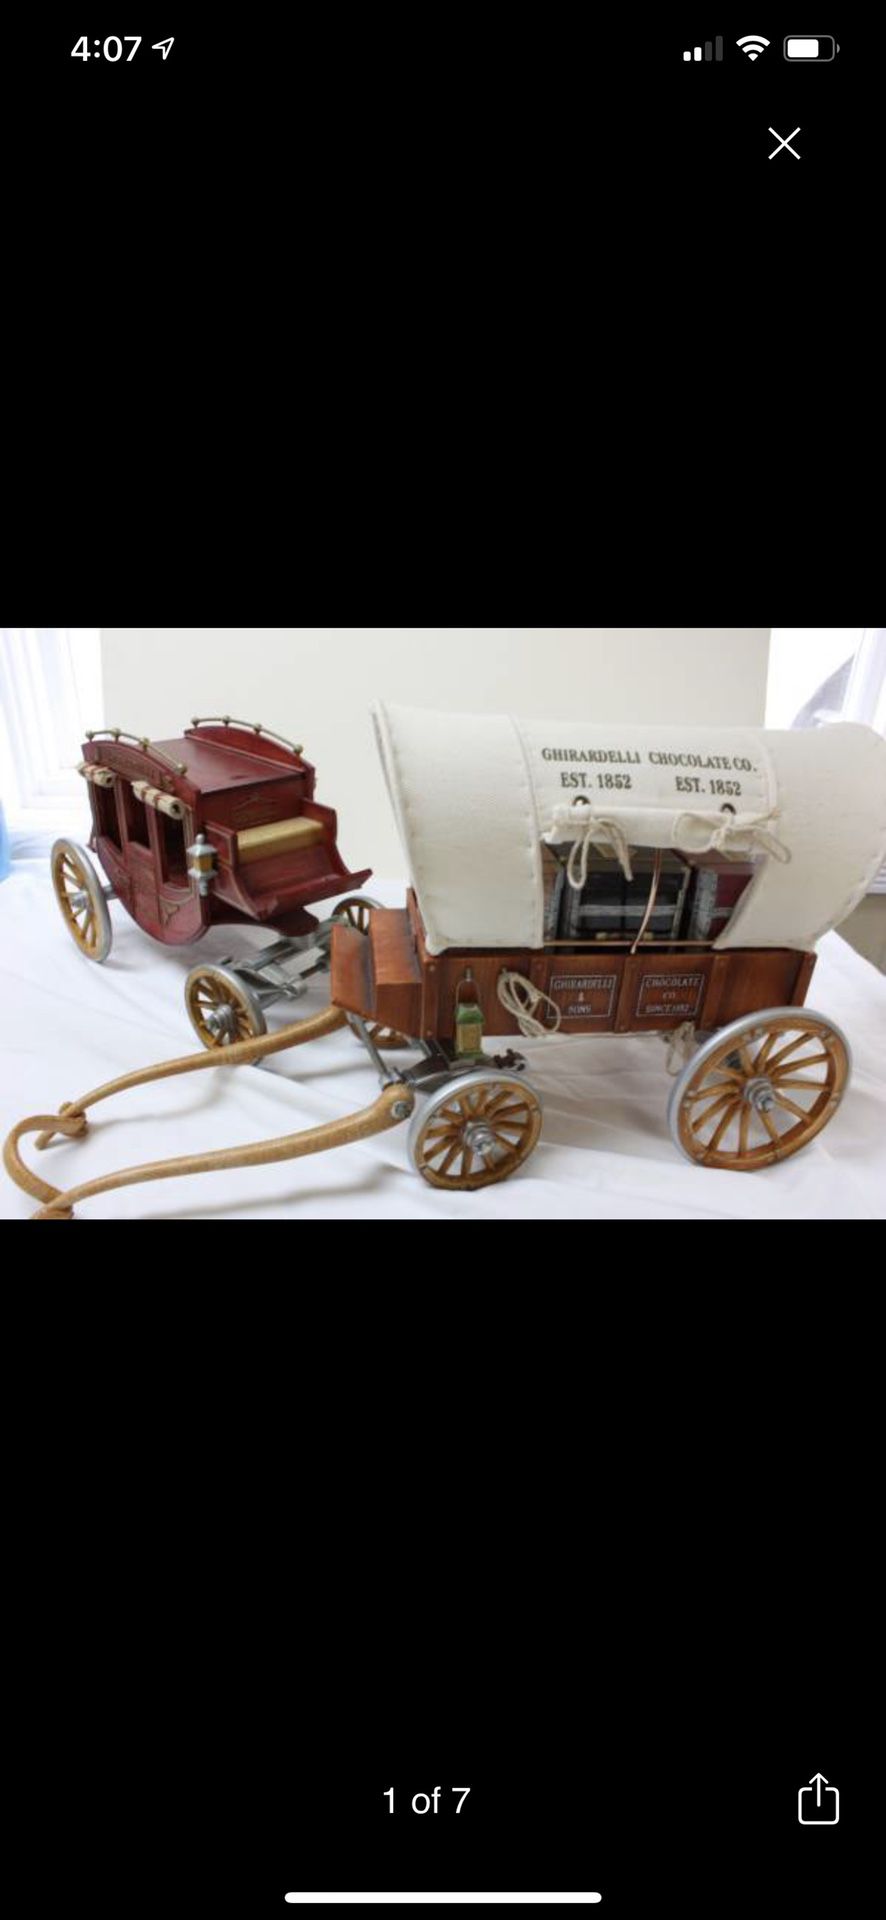 Ghiradelli Covered Wagon and Stage Coach